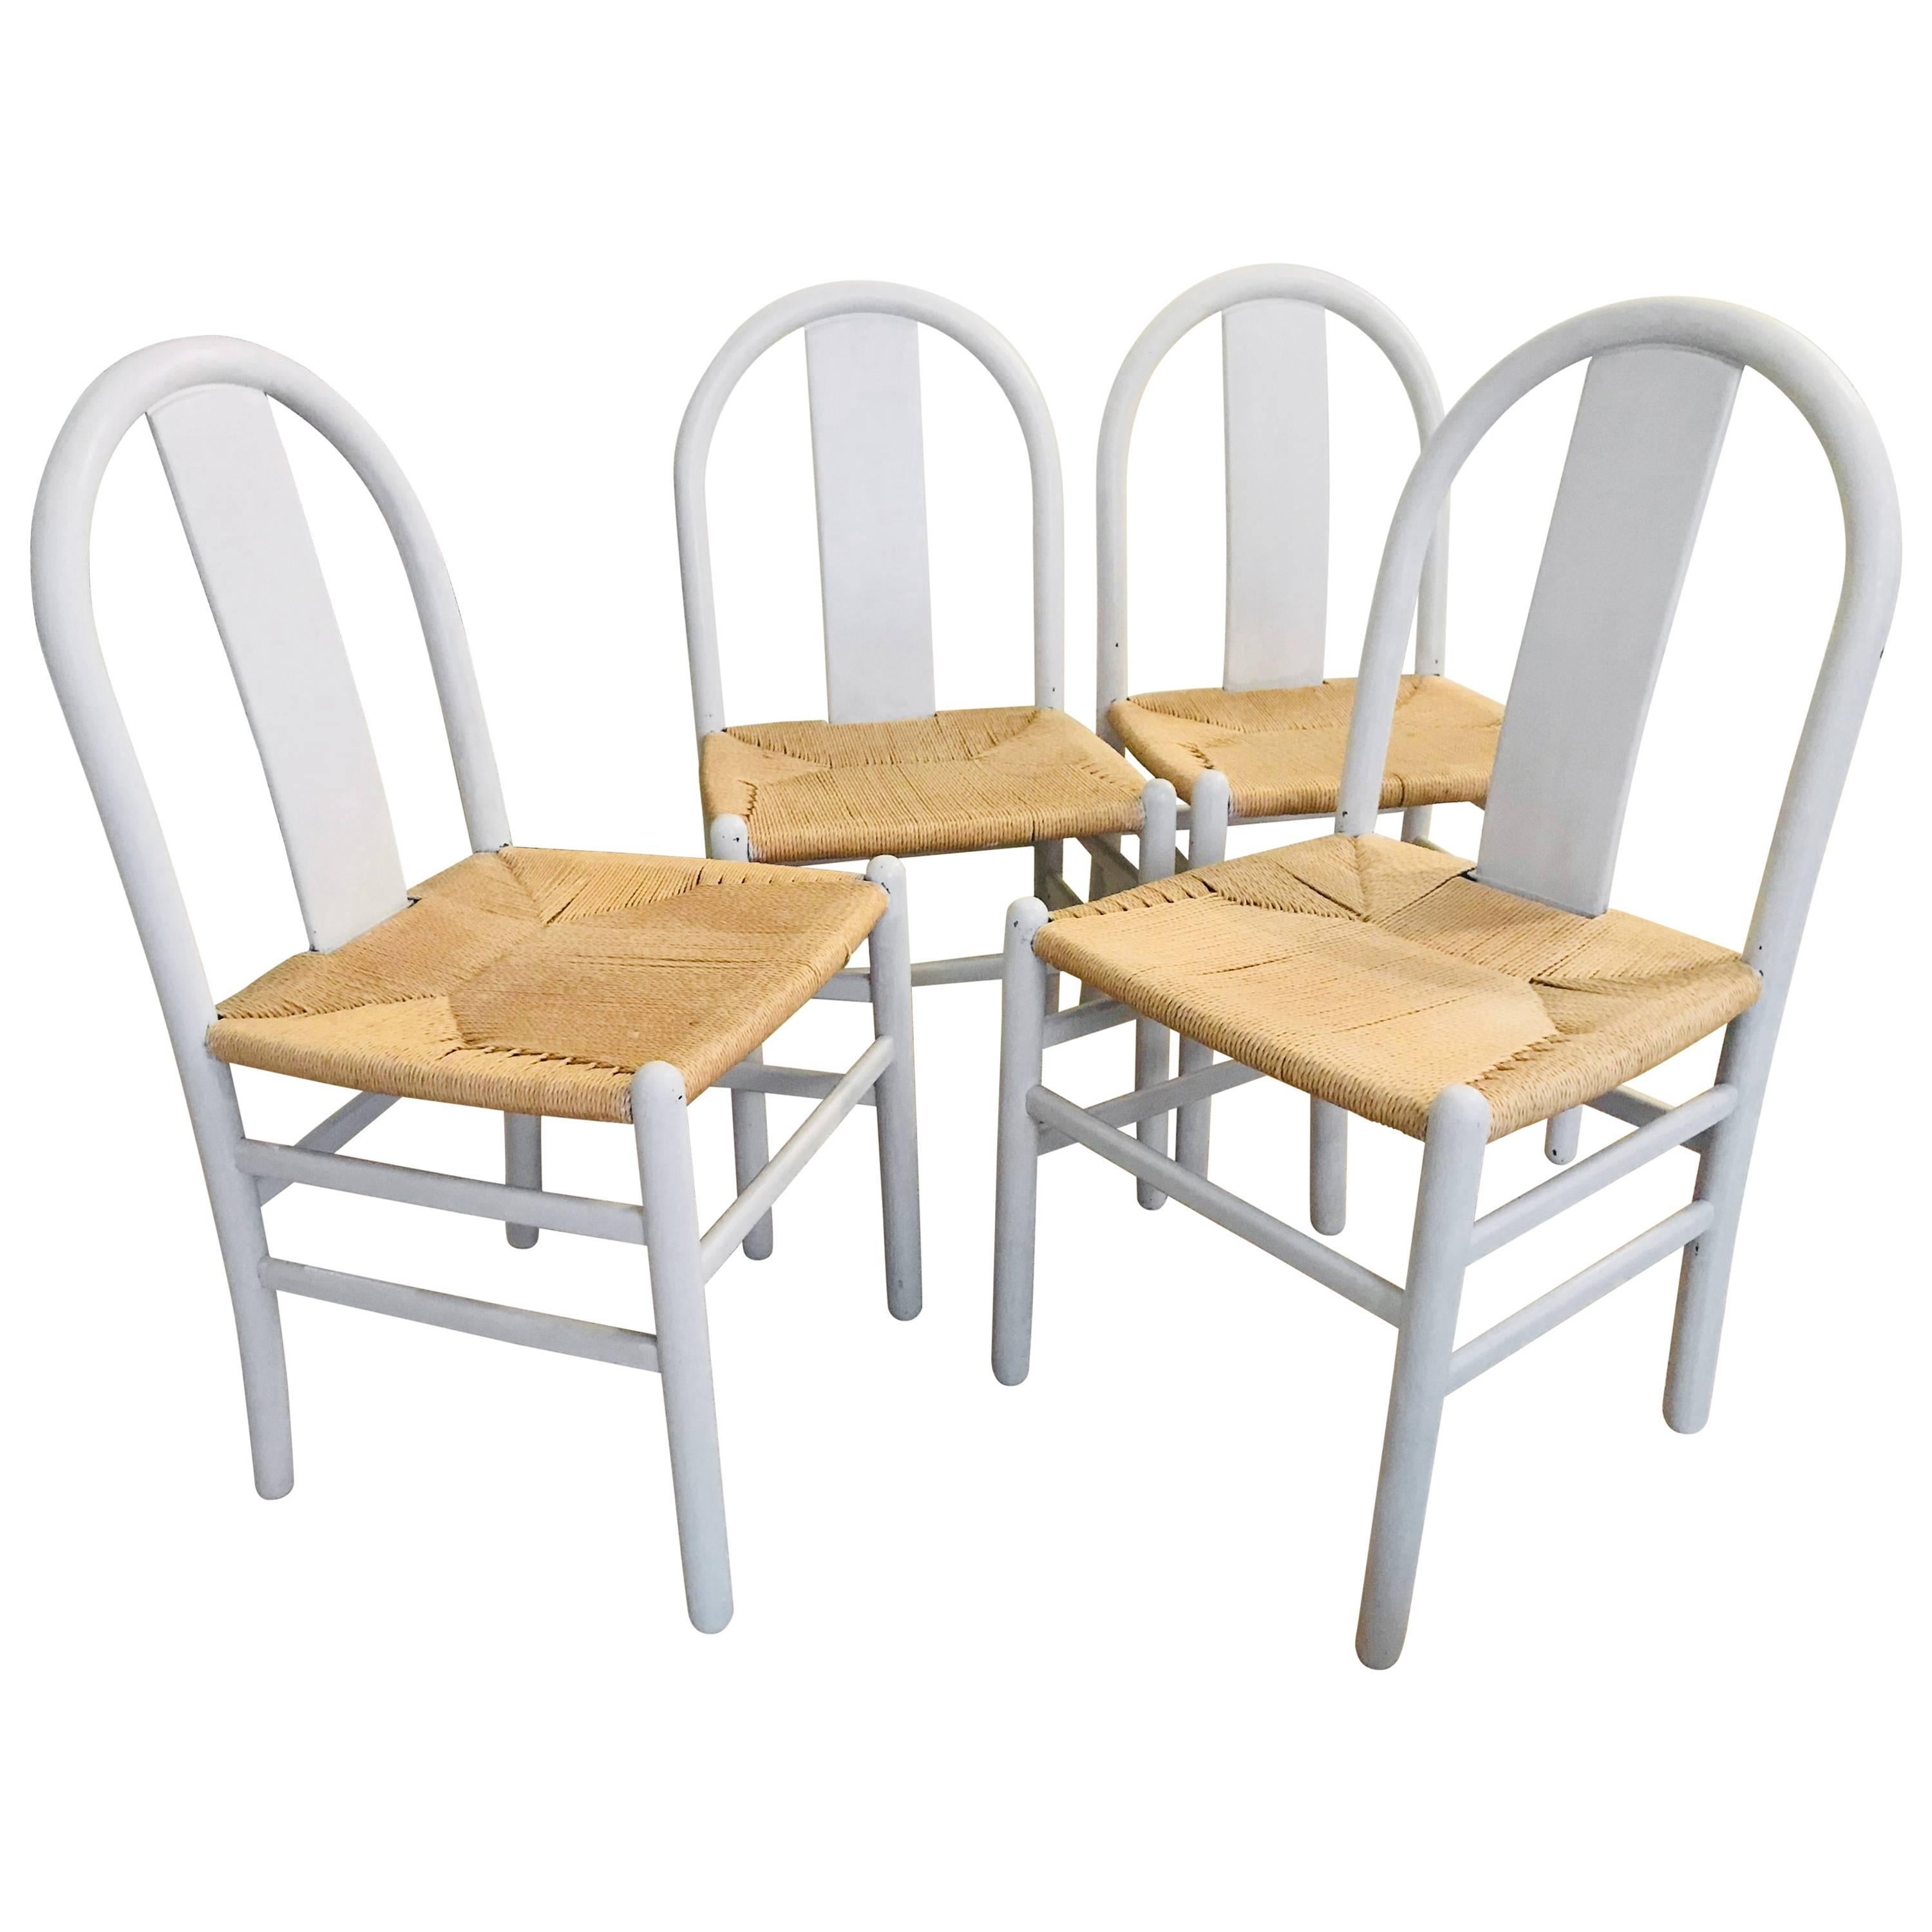 All Four Cane Tuscan Wooden Rustic White Chairs, Italy